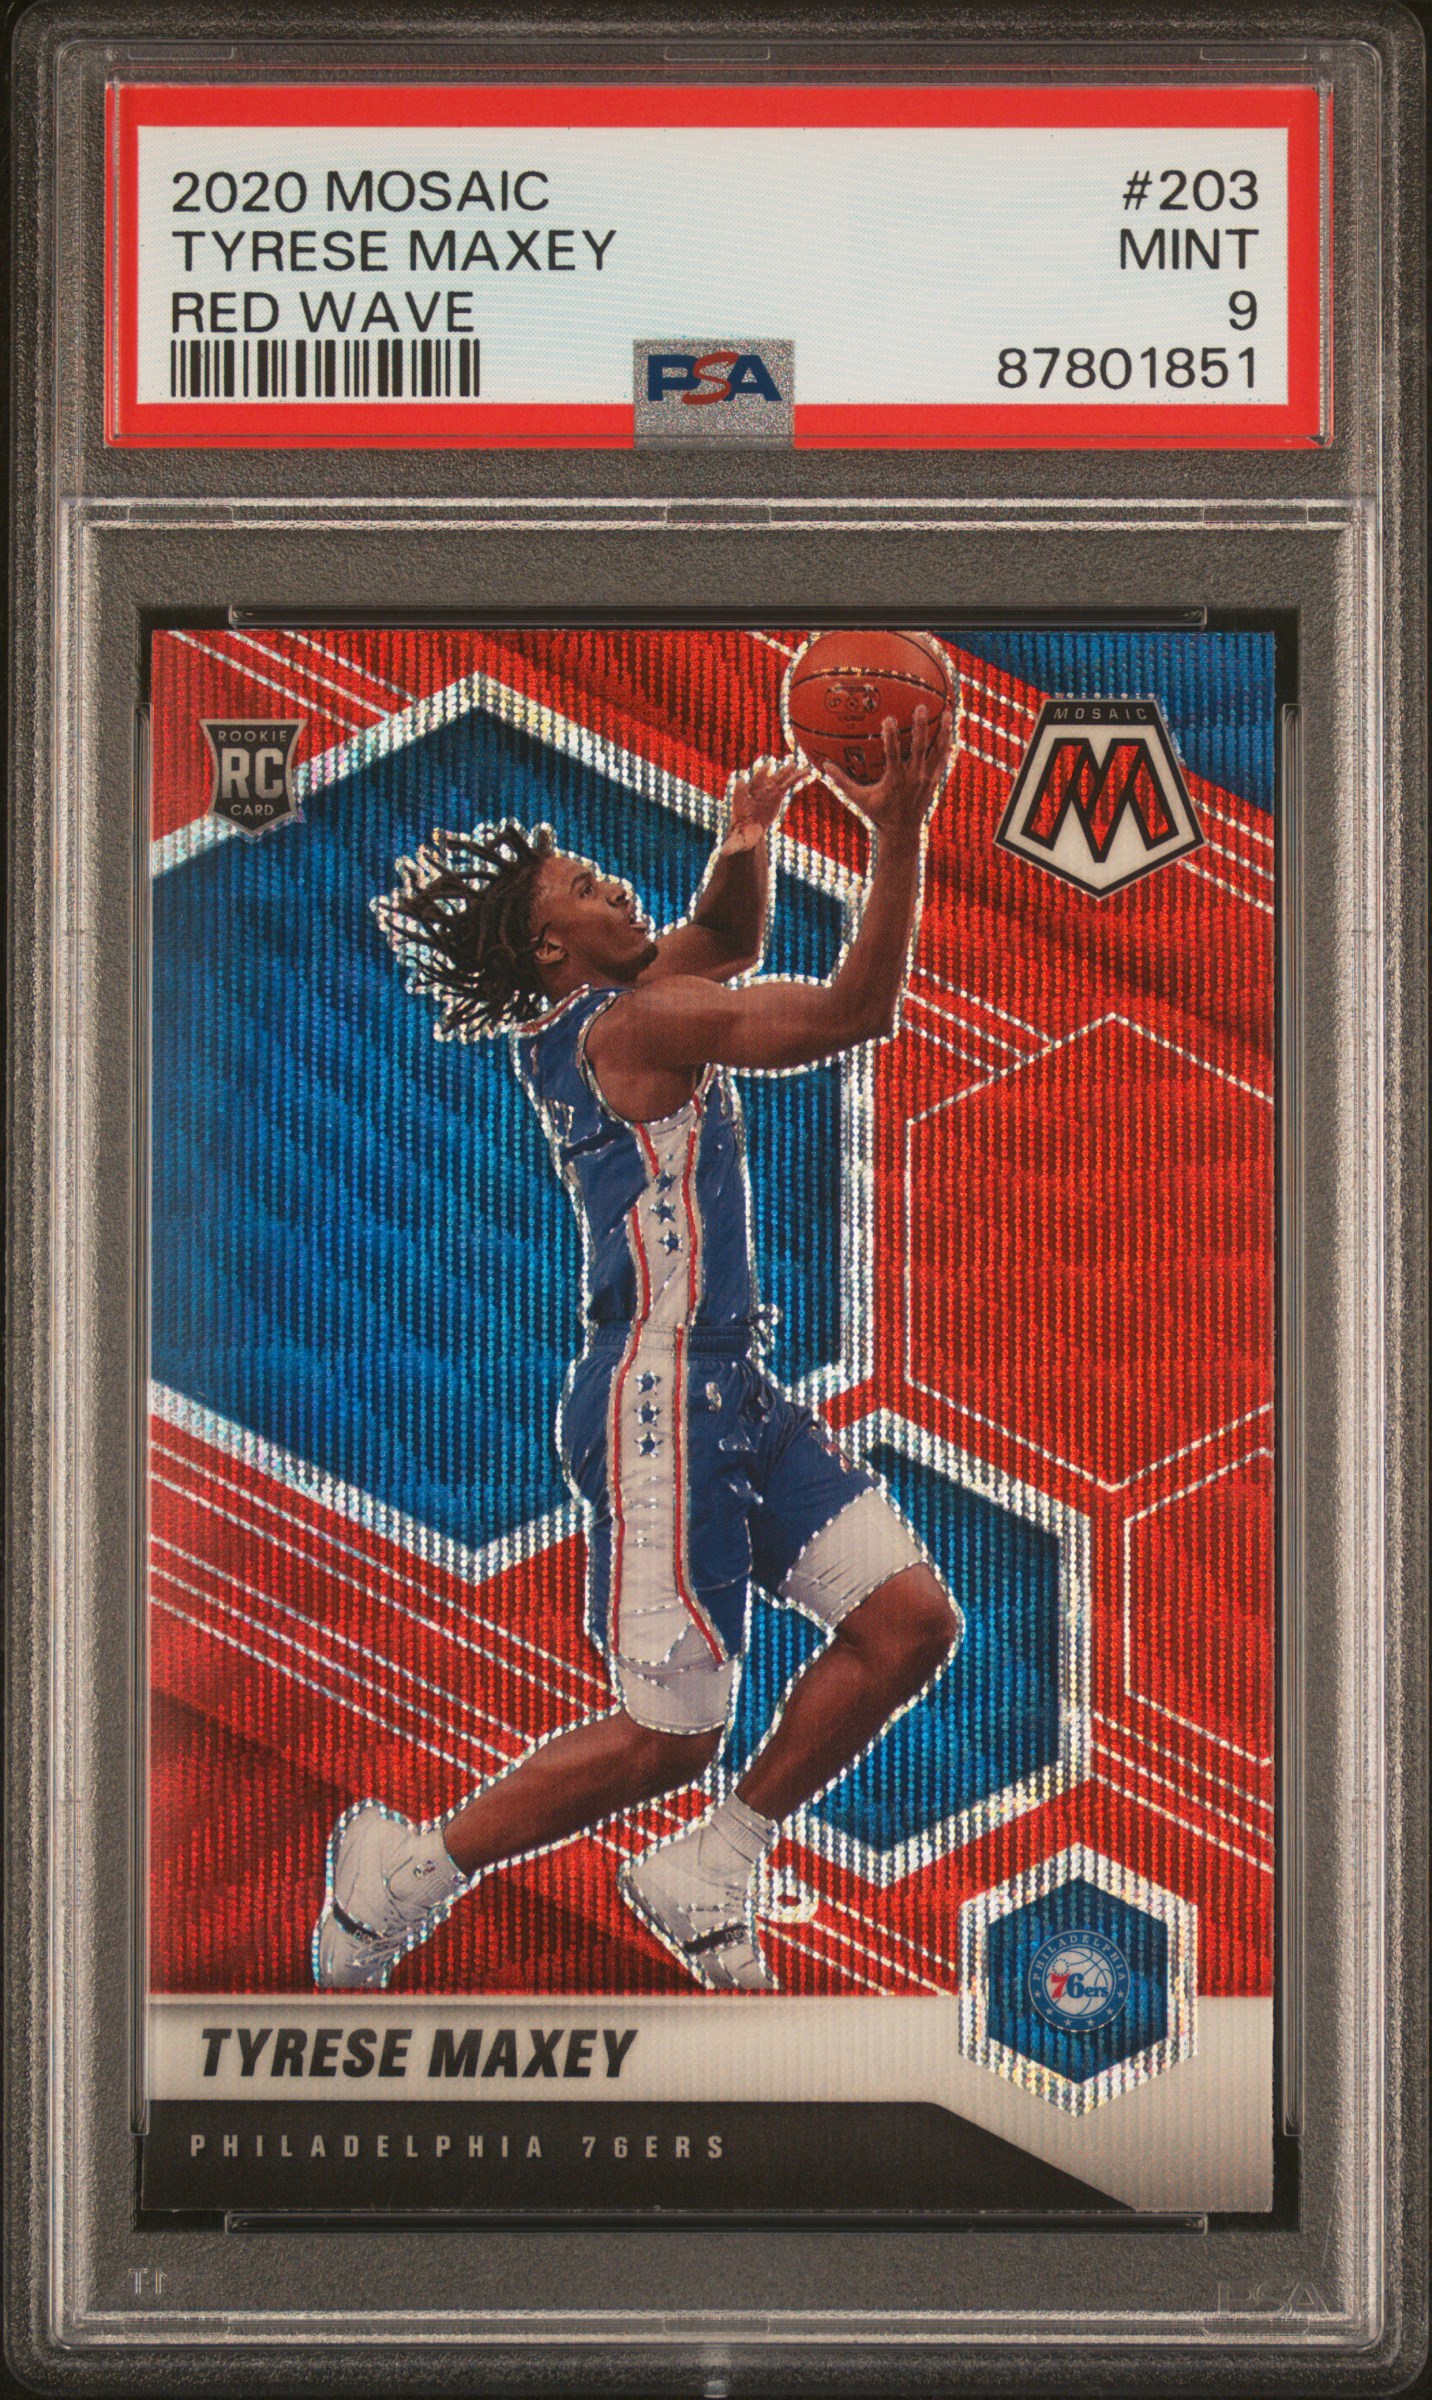 2020-21 Panini Mosaic Red Wave #203 Tyrese Maxey Rookie Card – PSA MINT 9